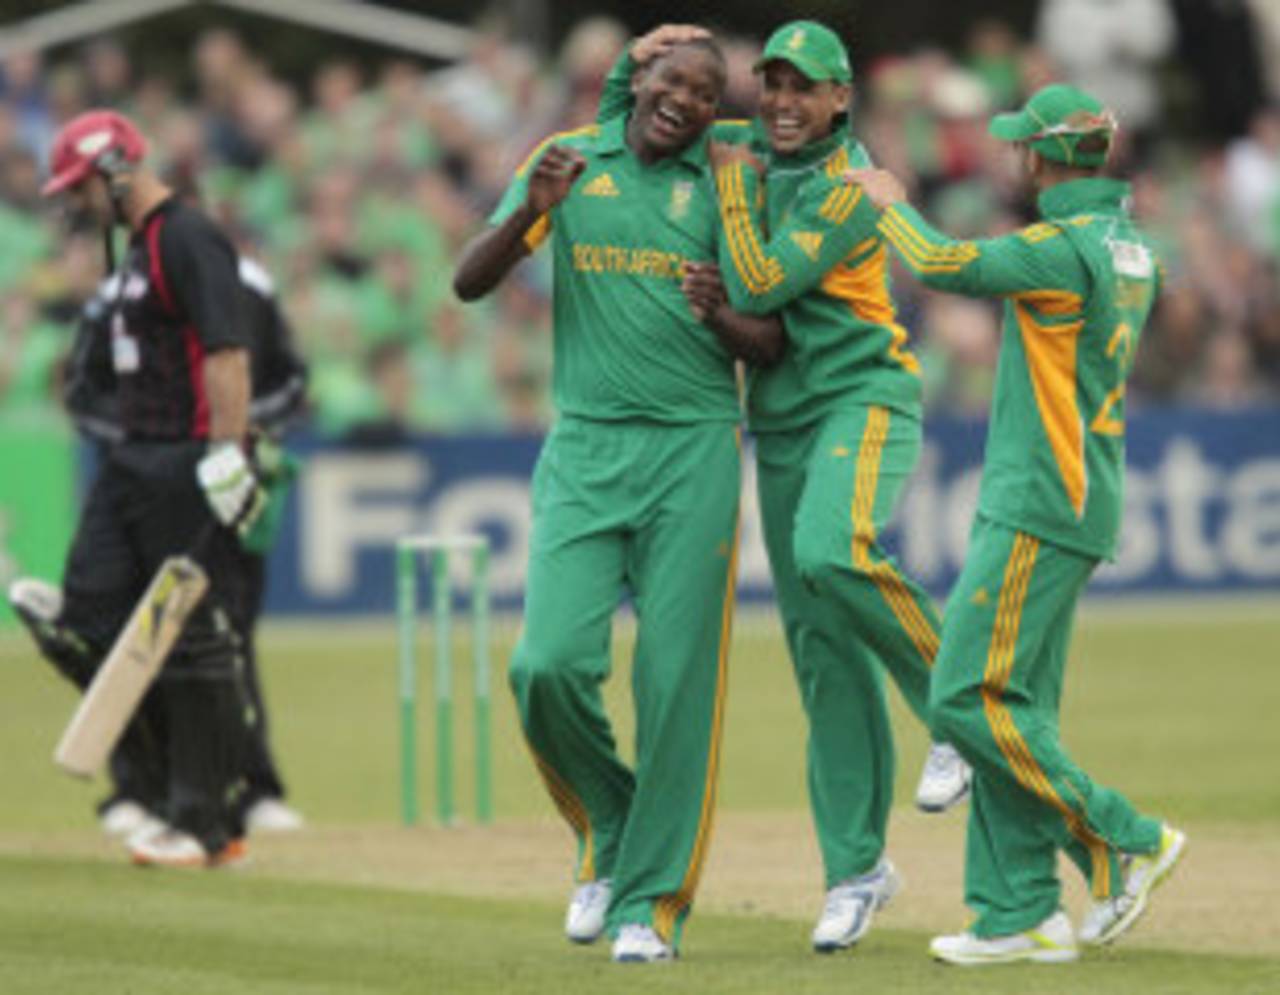 Lonwabo Tsotsobe is congratulated on one of four wickets, Canterbury v South Africans, Twenty20, Christchurch, February 15, 2012 